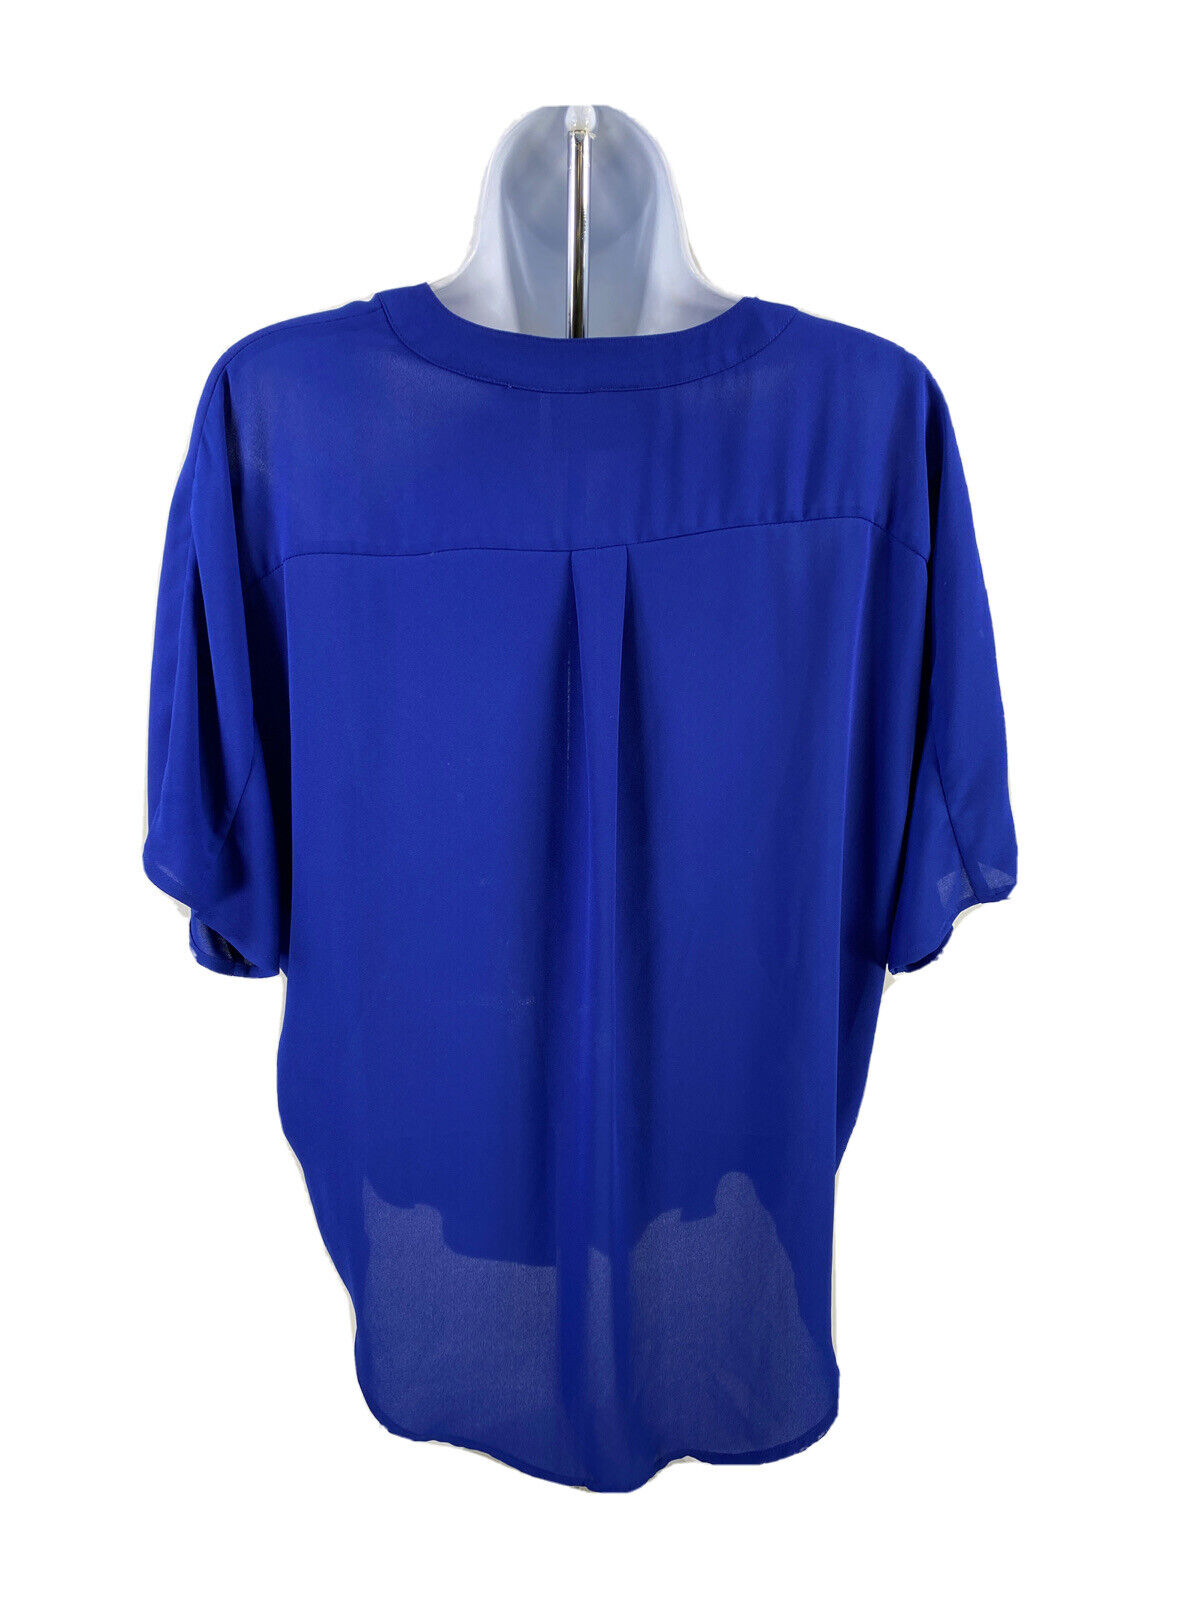 Chico's Women's Blue Short Sleeve Sheer Tunic Top Blouse - 0/US S